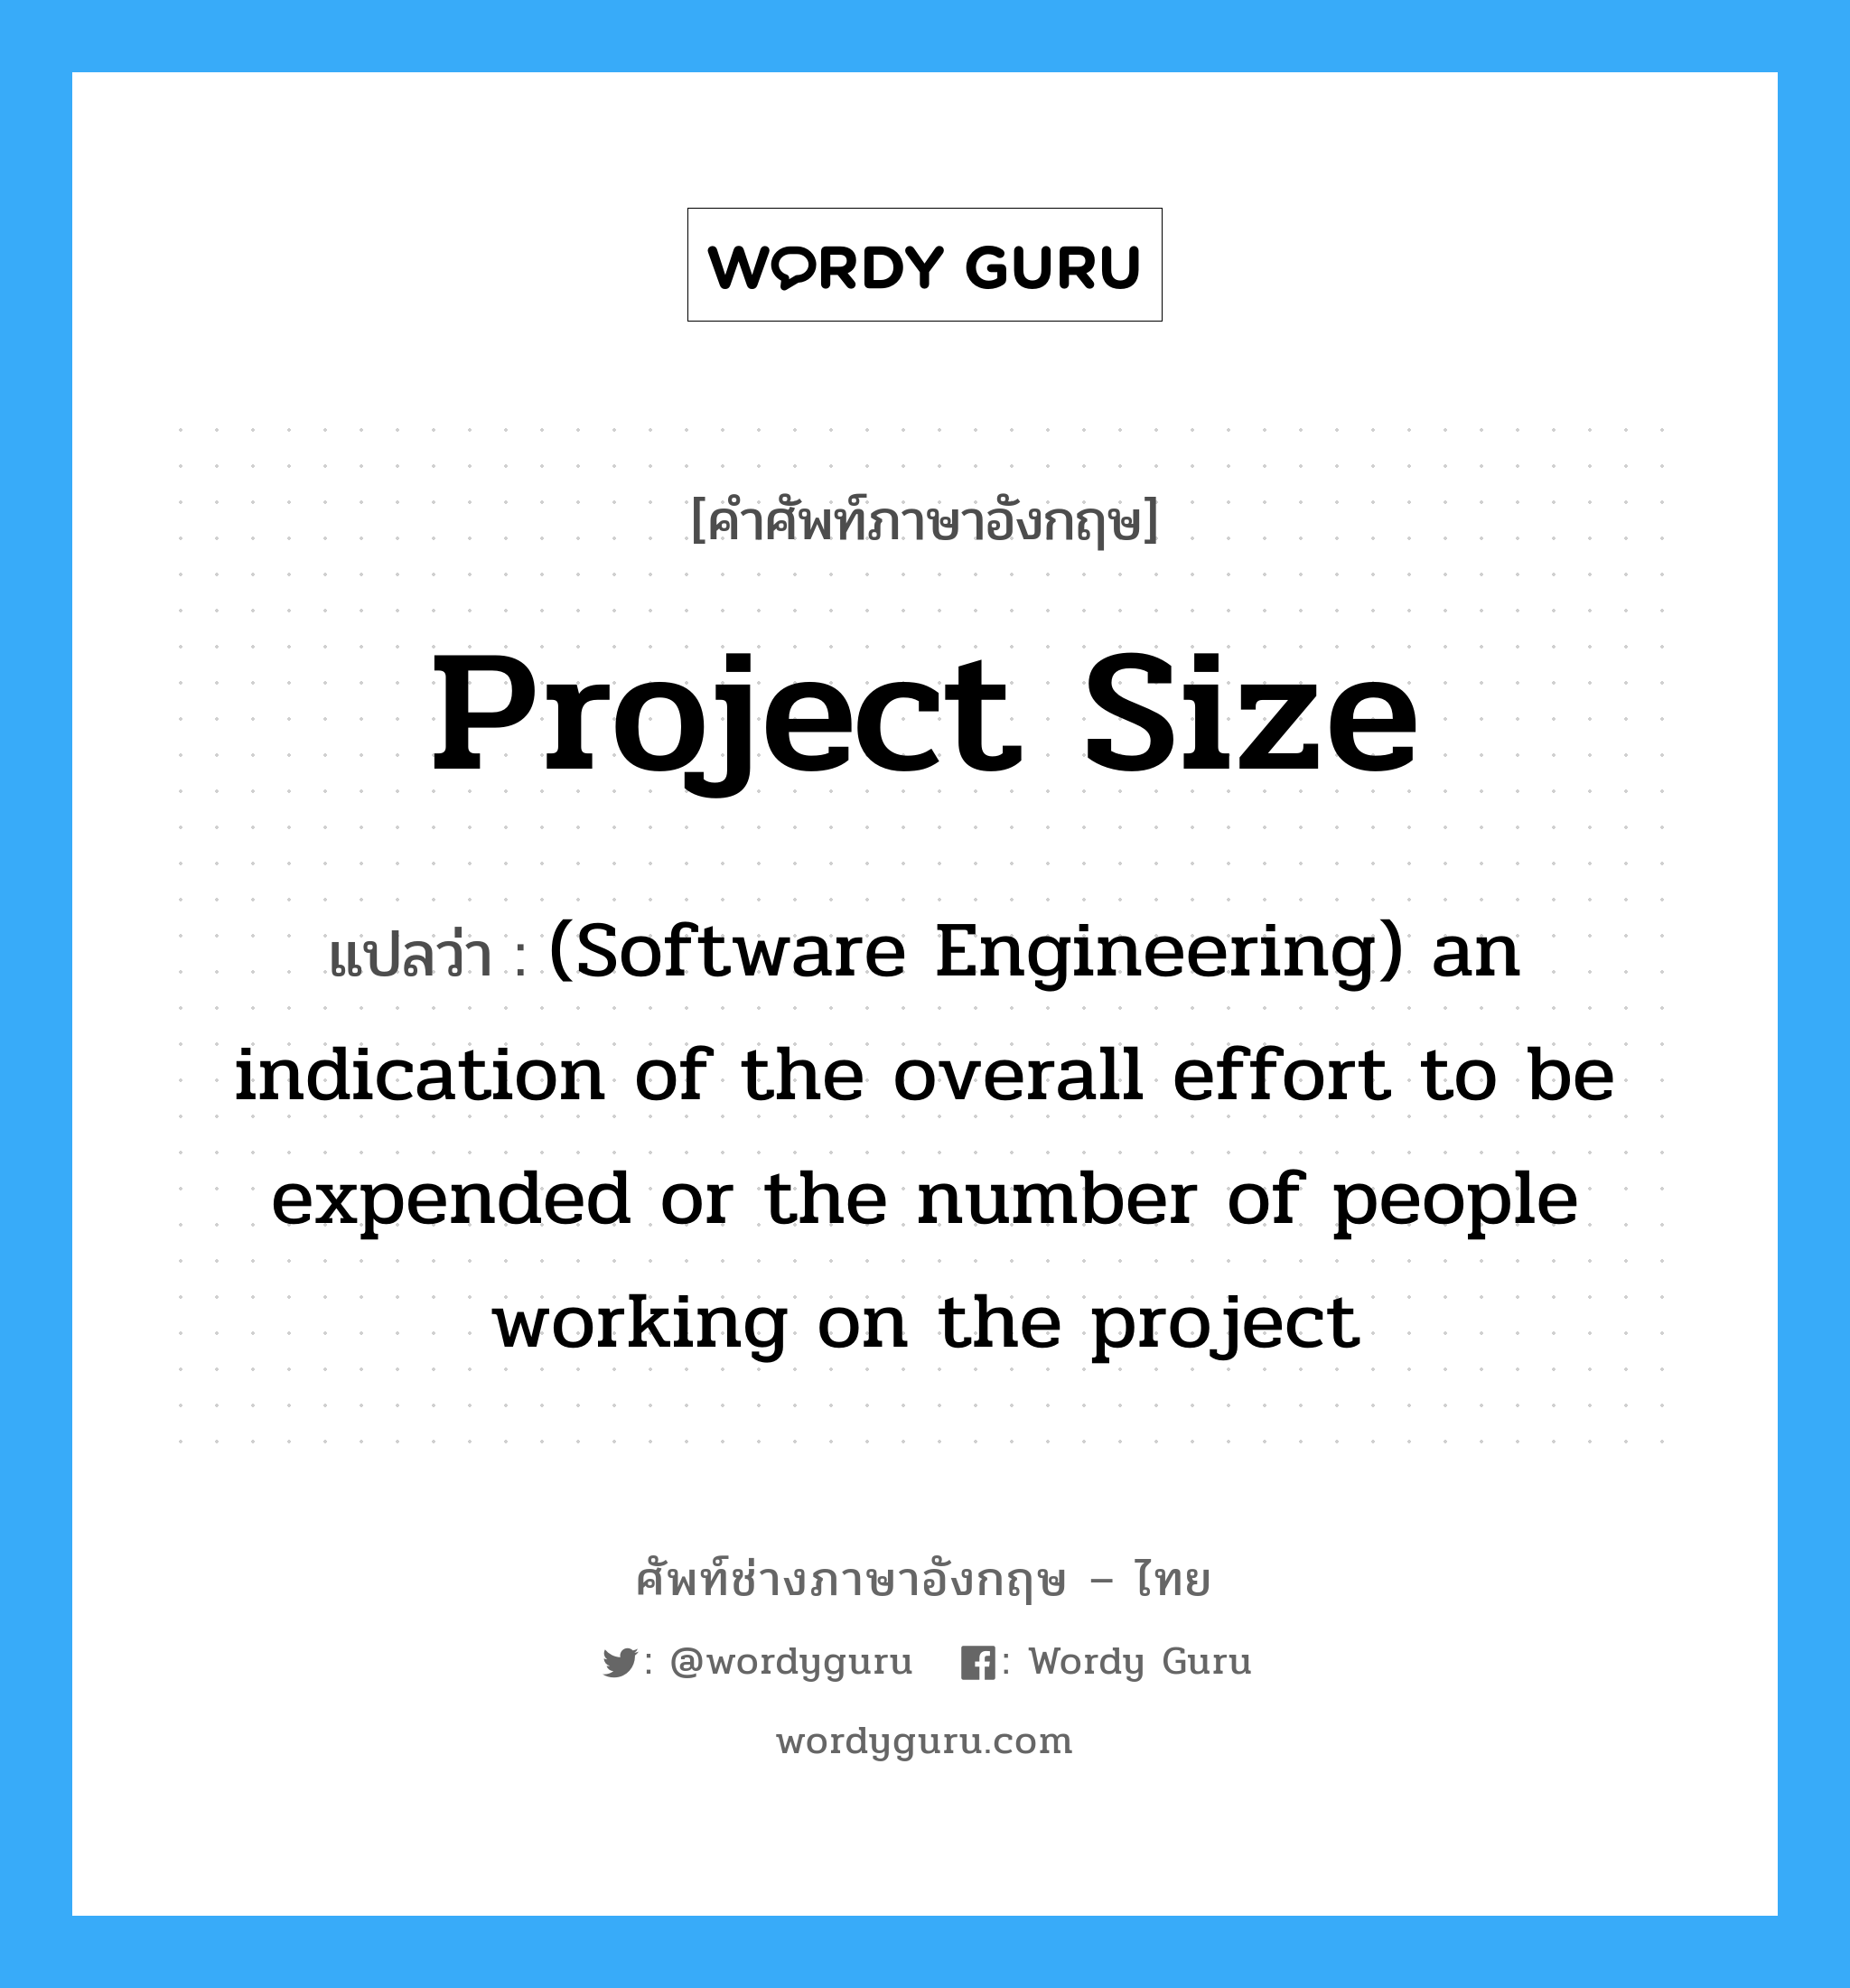 (Software Engineering) an indication of the overall effort to be expended or the number of people working on the project ภาษาอังกฤษ?, คำศัพท์ช่างภาษาอังกฤษ - ไทย (Software Engineering) an indication of the overall effort to be expended or the number of people working on the project คำศัพท์ภาษาอังกฤษ (Software Engineering) an indication of the overall effort to be expended or the number of people working on the project แปลว่า Project size